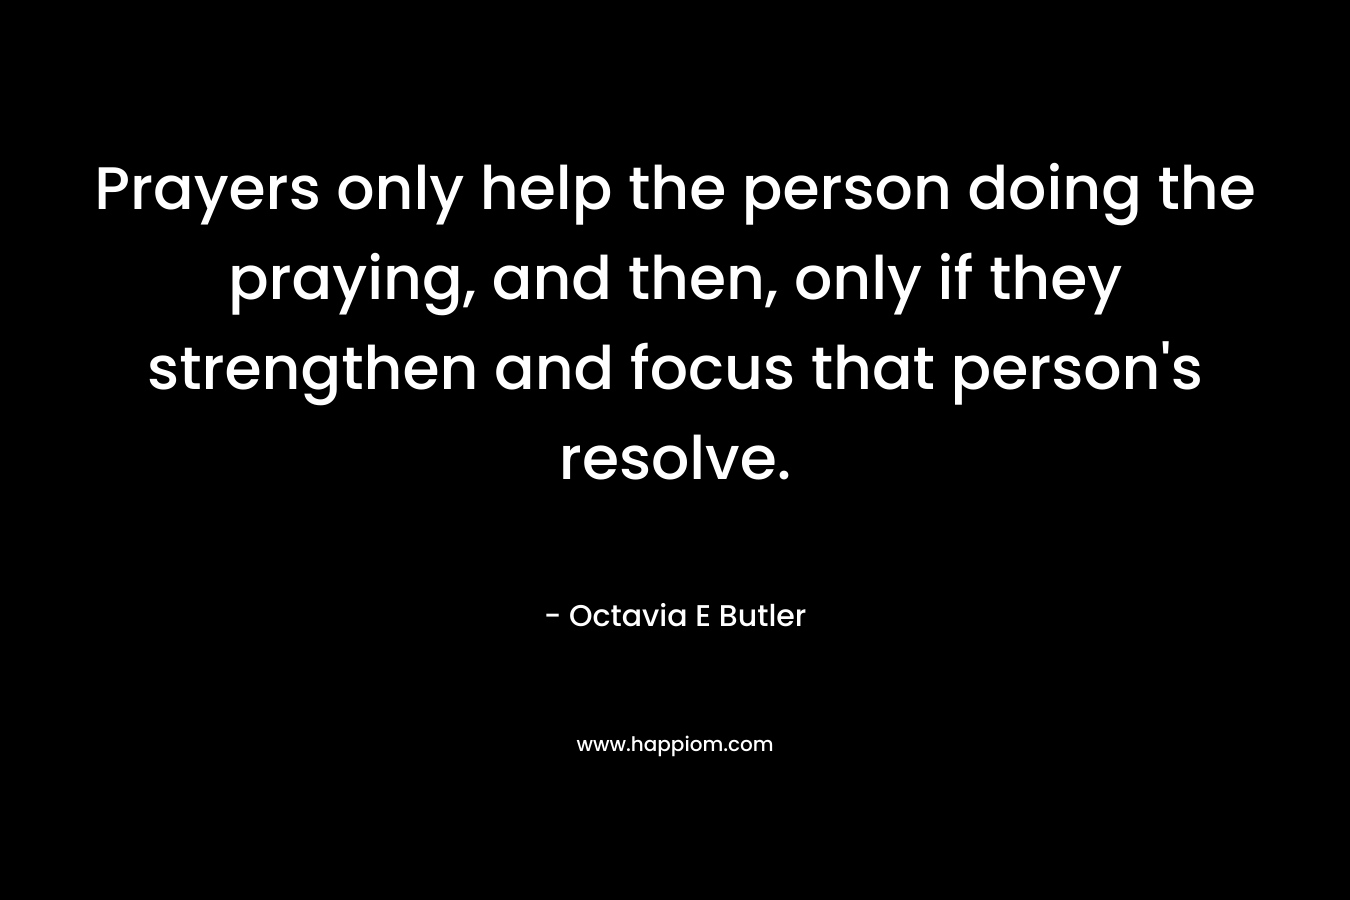 Prayers only help the person doing the praying, and then, only if they strengthen and focus that person's resolve.